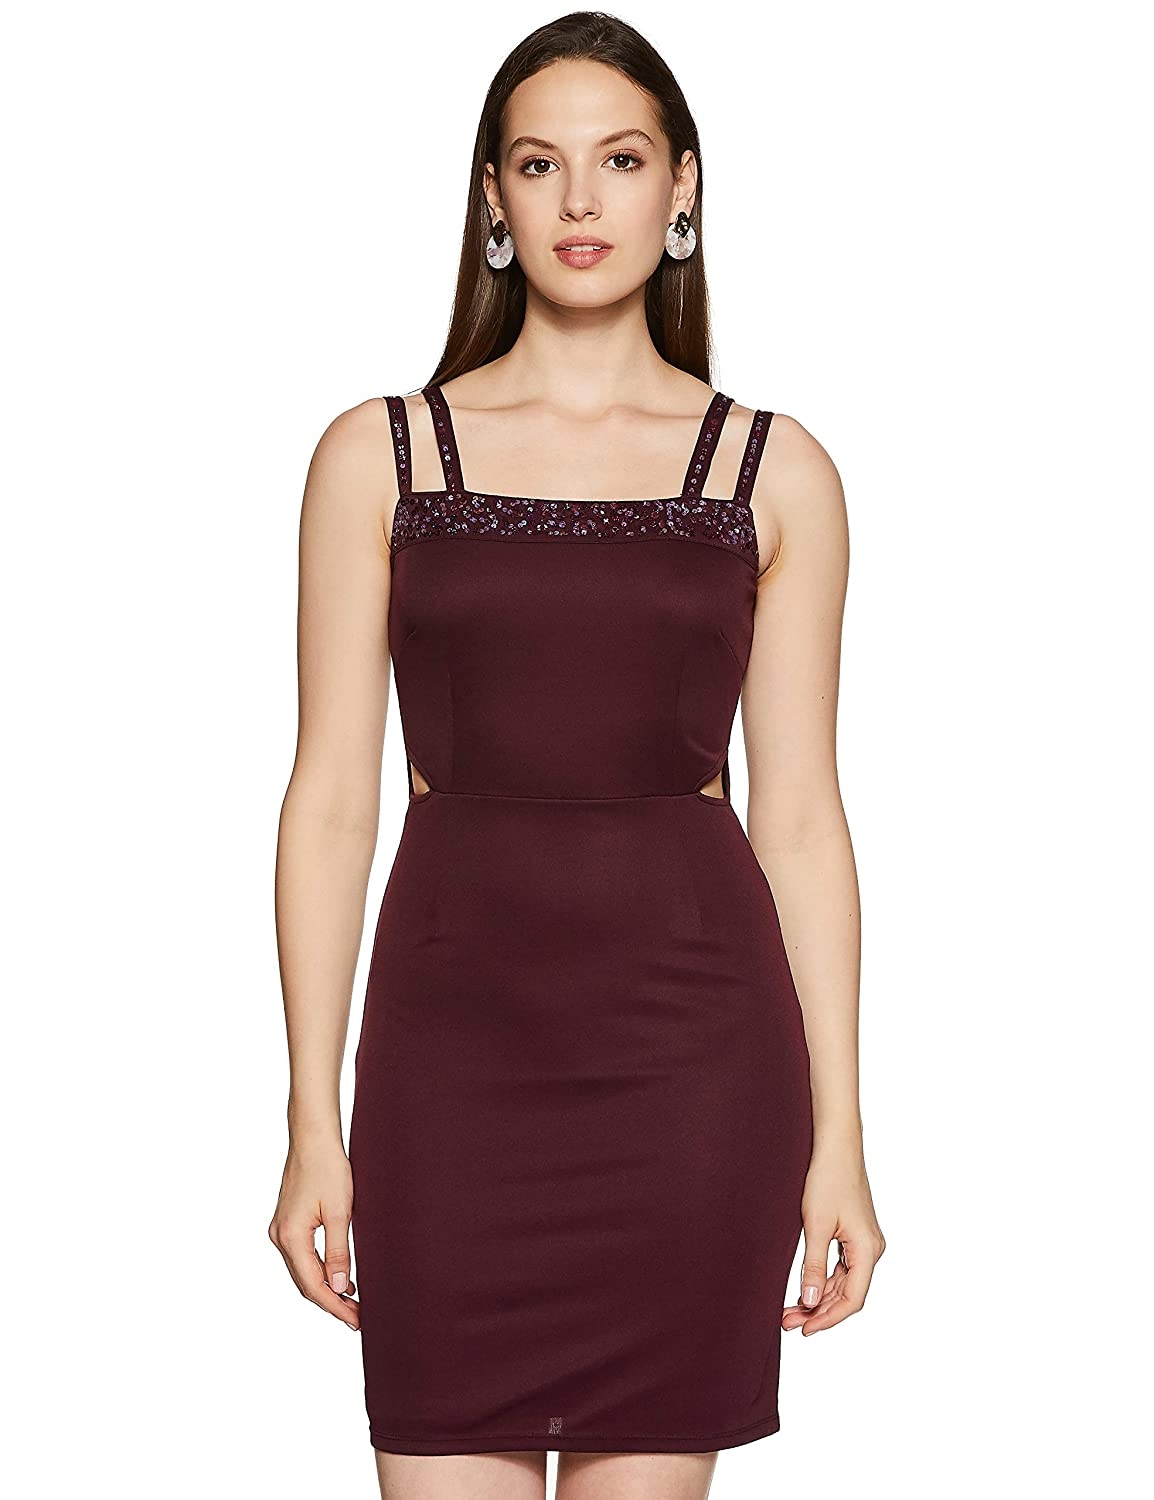 LY2 | LY2 Embellished detail bodycon Dress 0